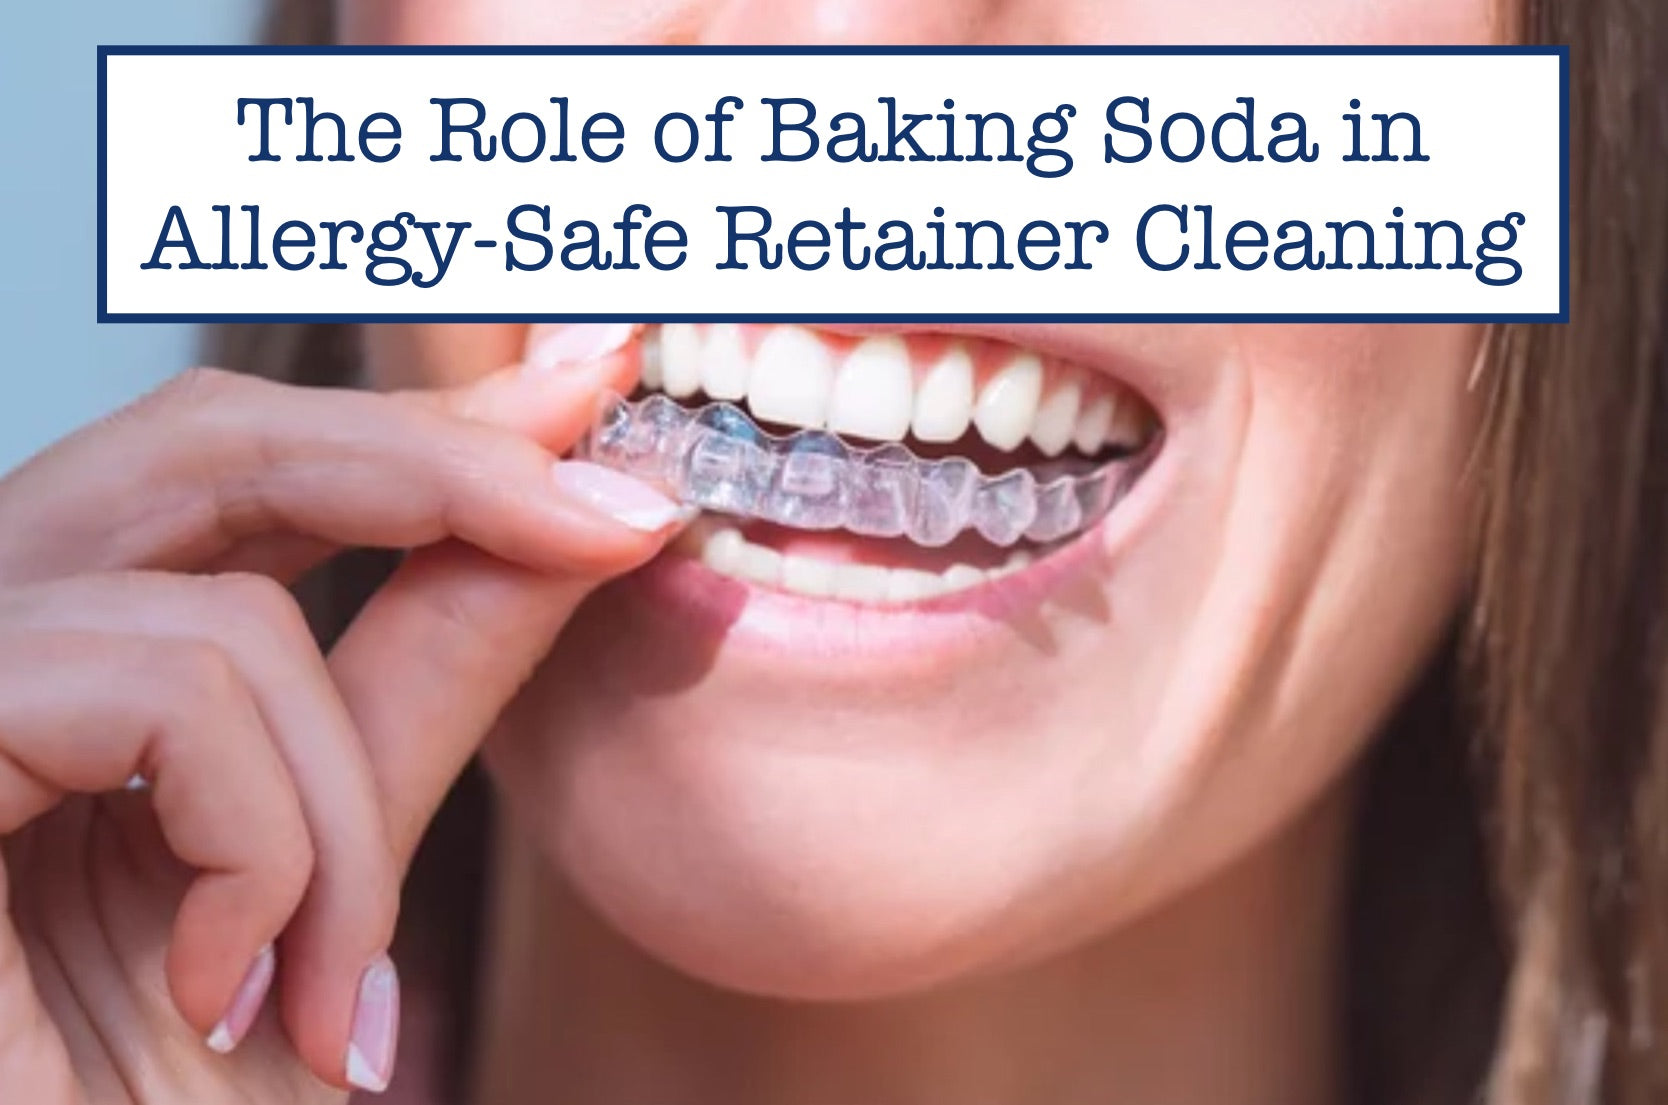 The Role of Baking Soda in Allergy-Safe Retainer Cleaning